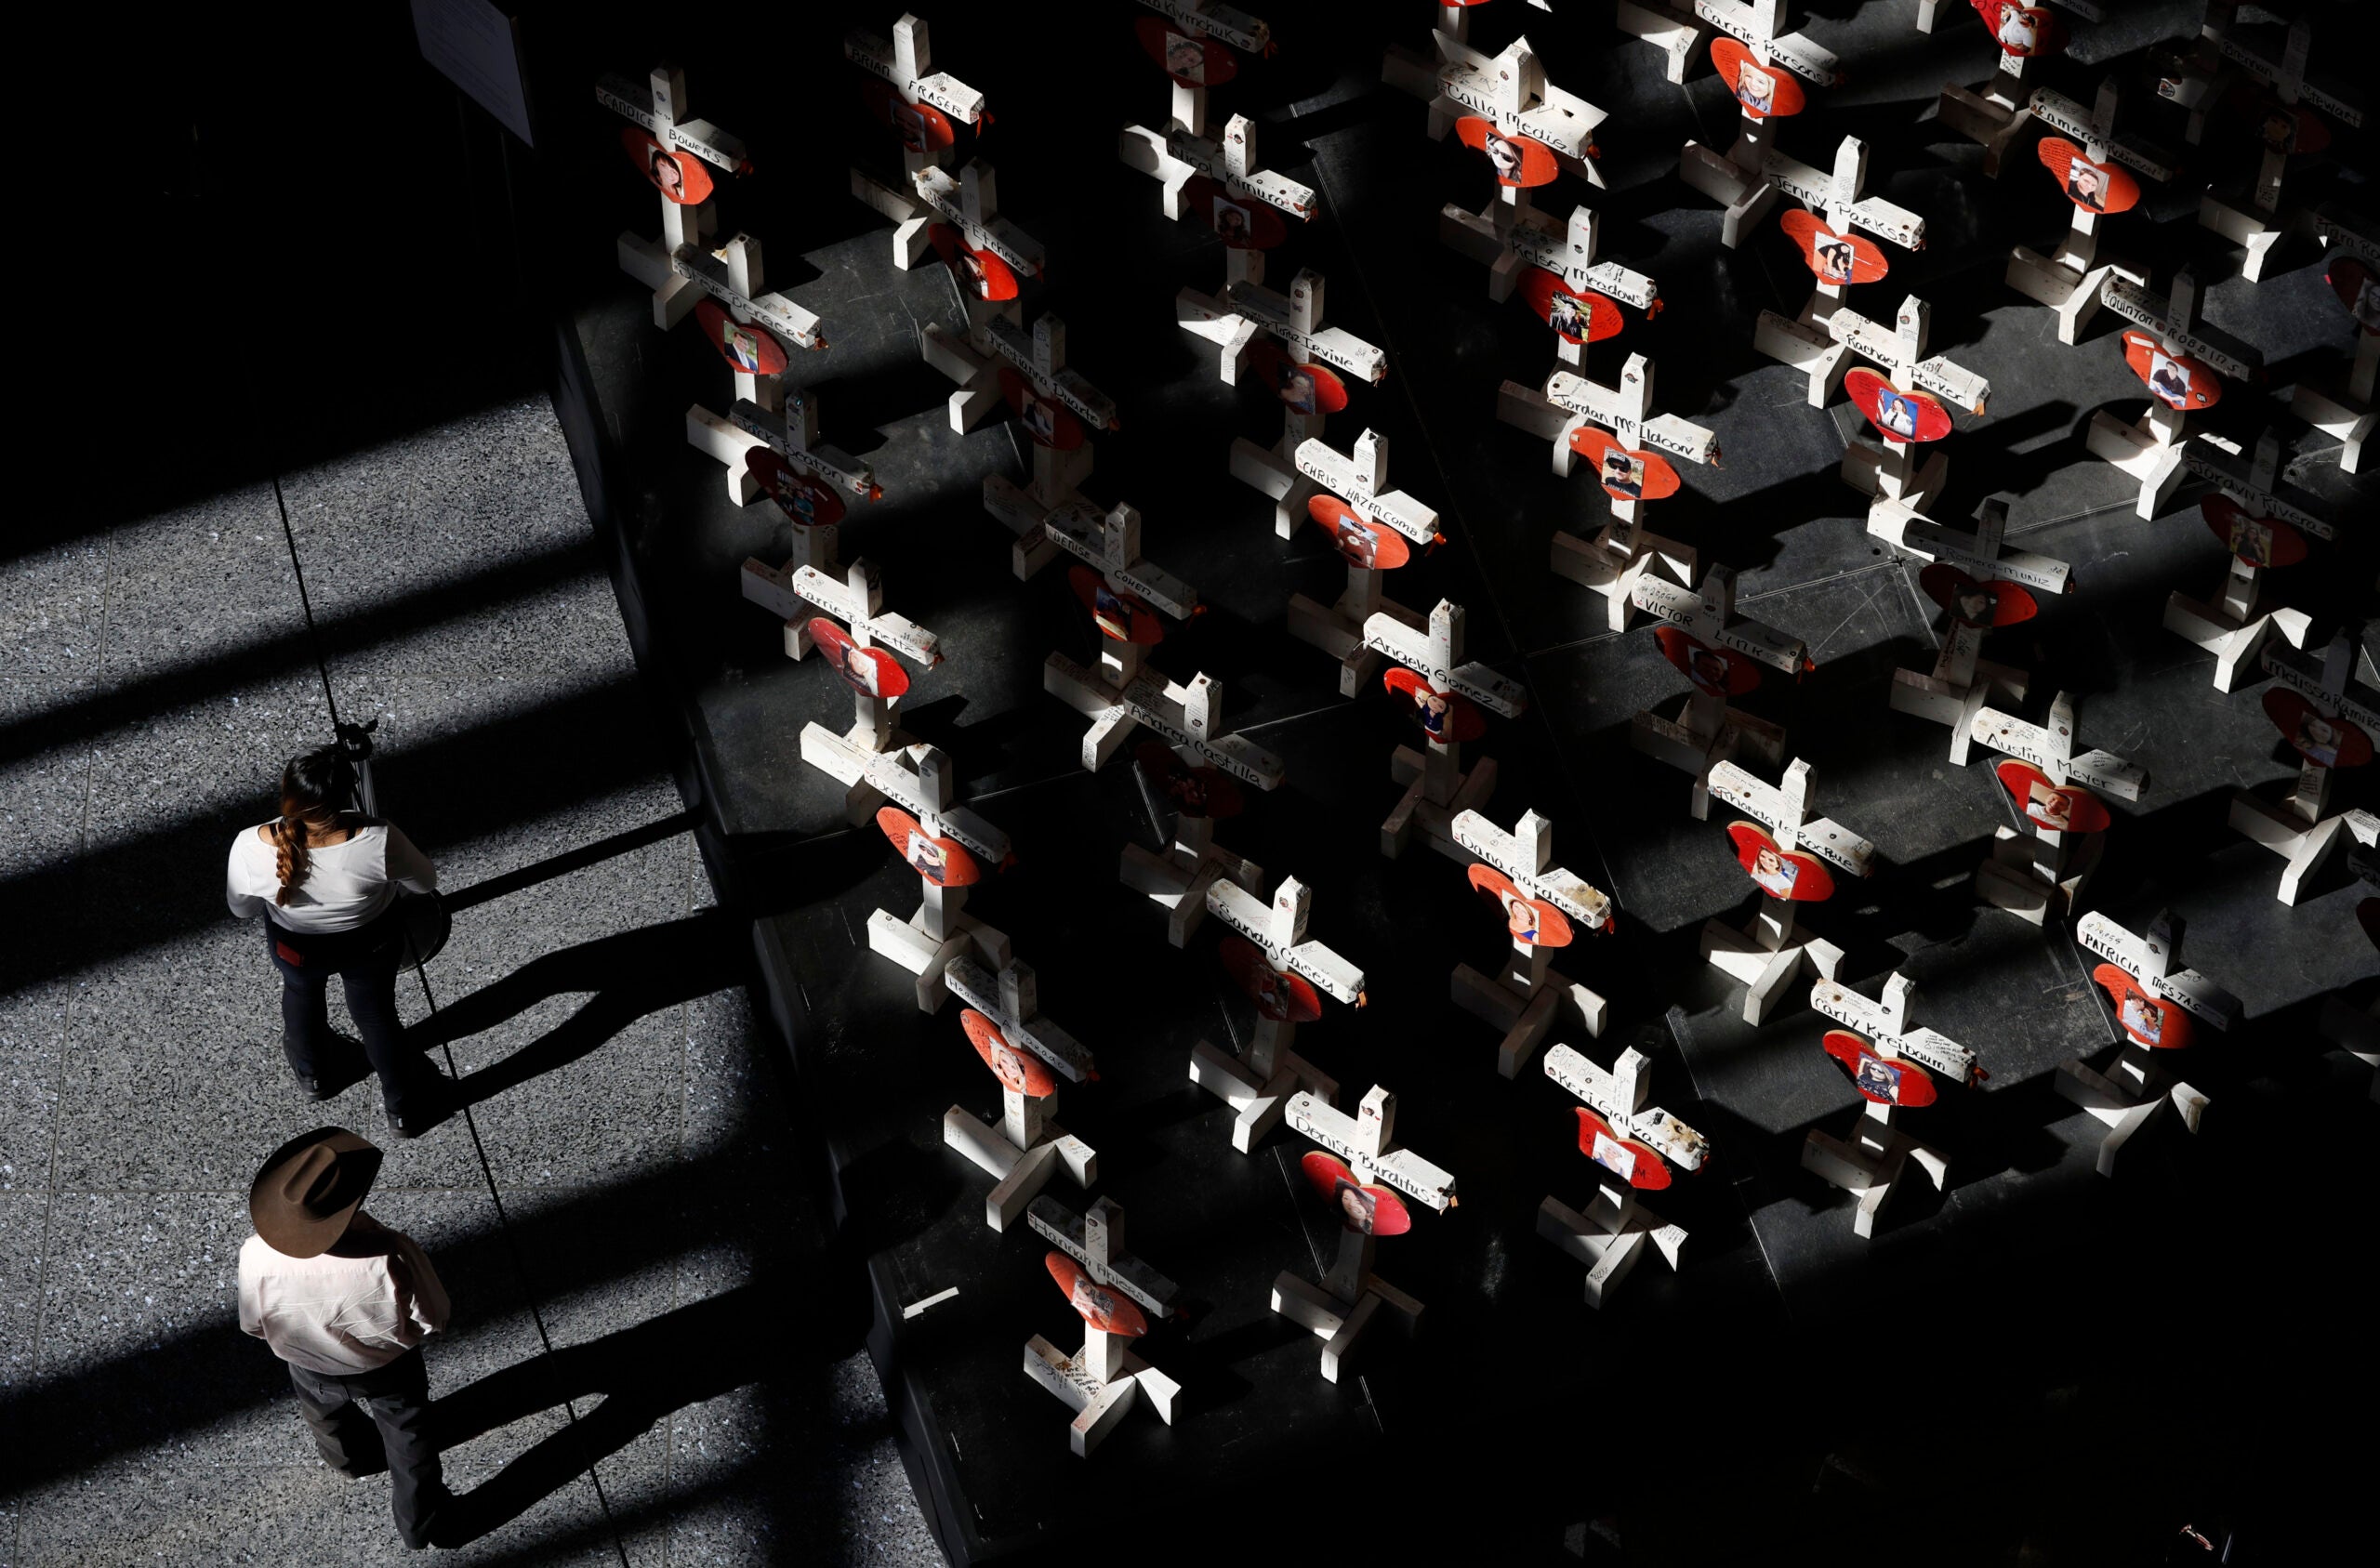 alt = People look at a display of wooden crosses and a Star of David on display at the Clark County Government Center in Las Vegas in 2018.